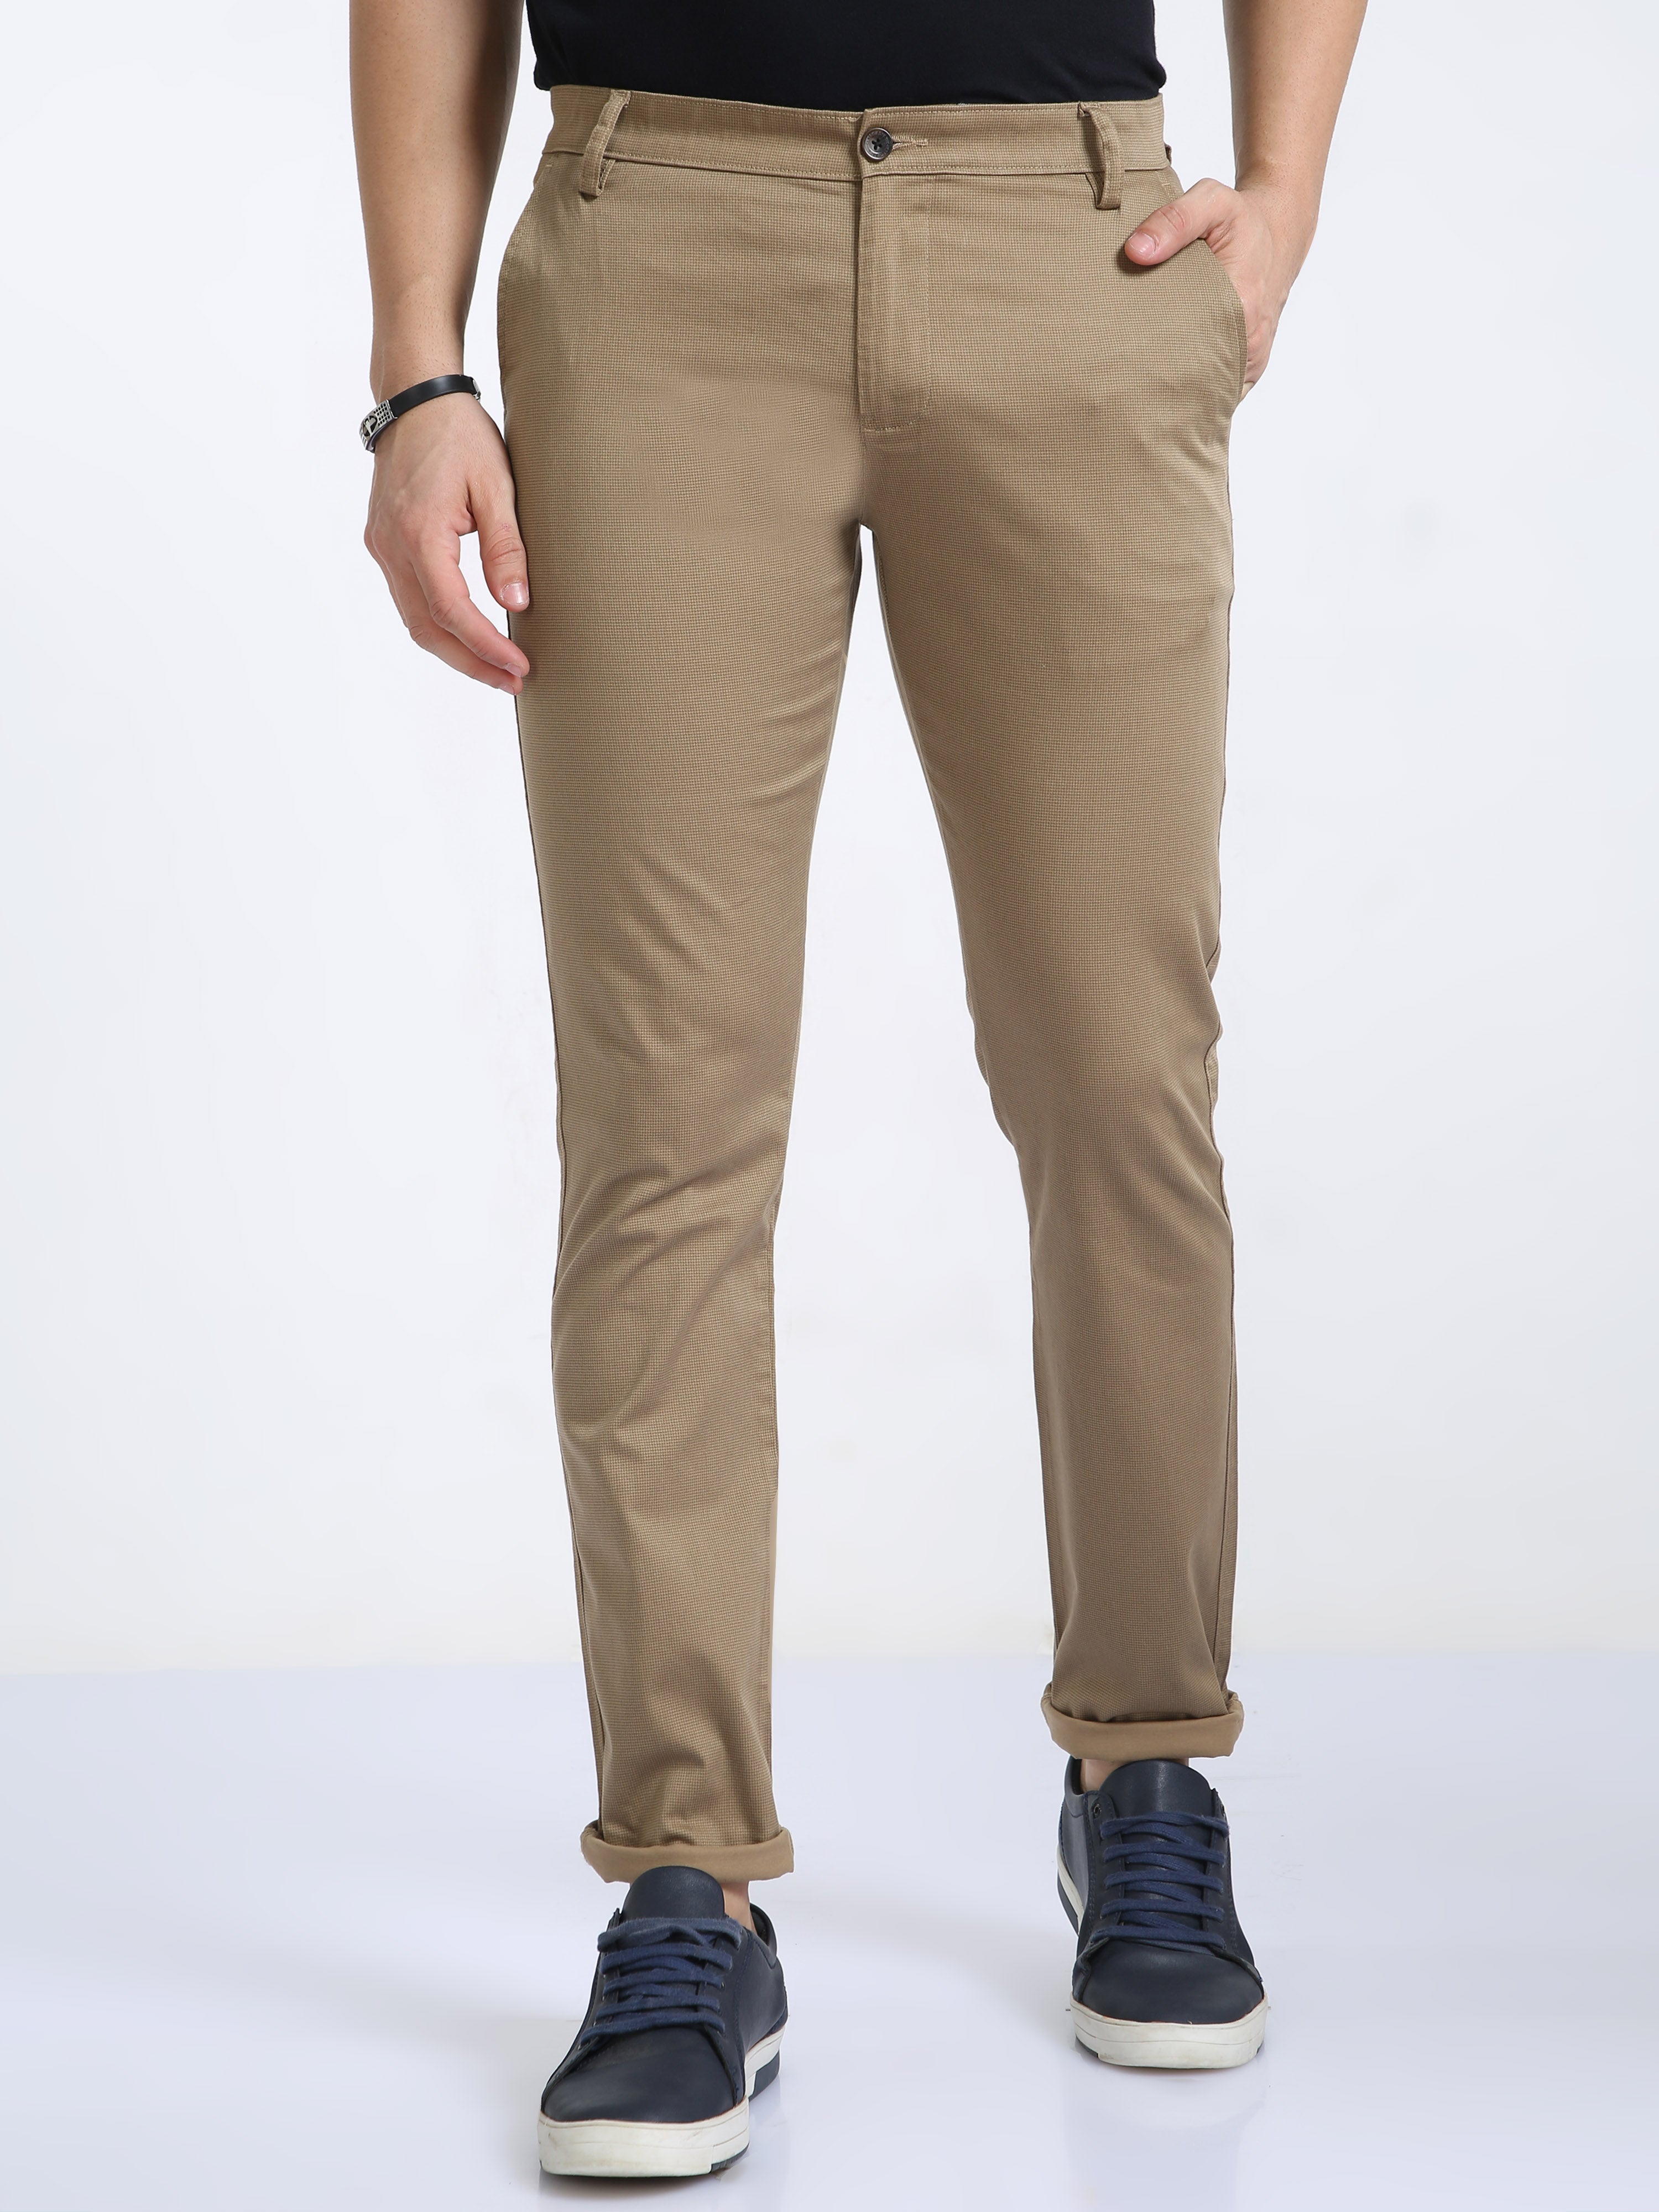 Classic Polo Mens Moderate Fit Solid Khakhi Color Trousers | To2-21 D-Kha-Mf-Ly